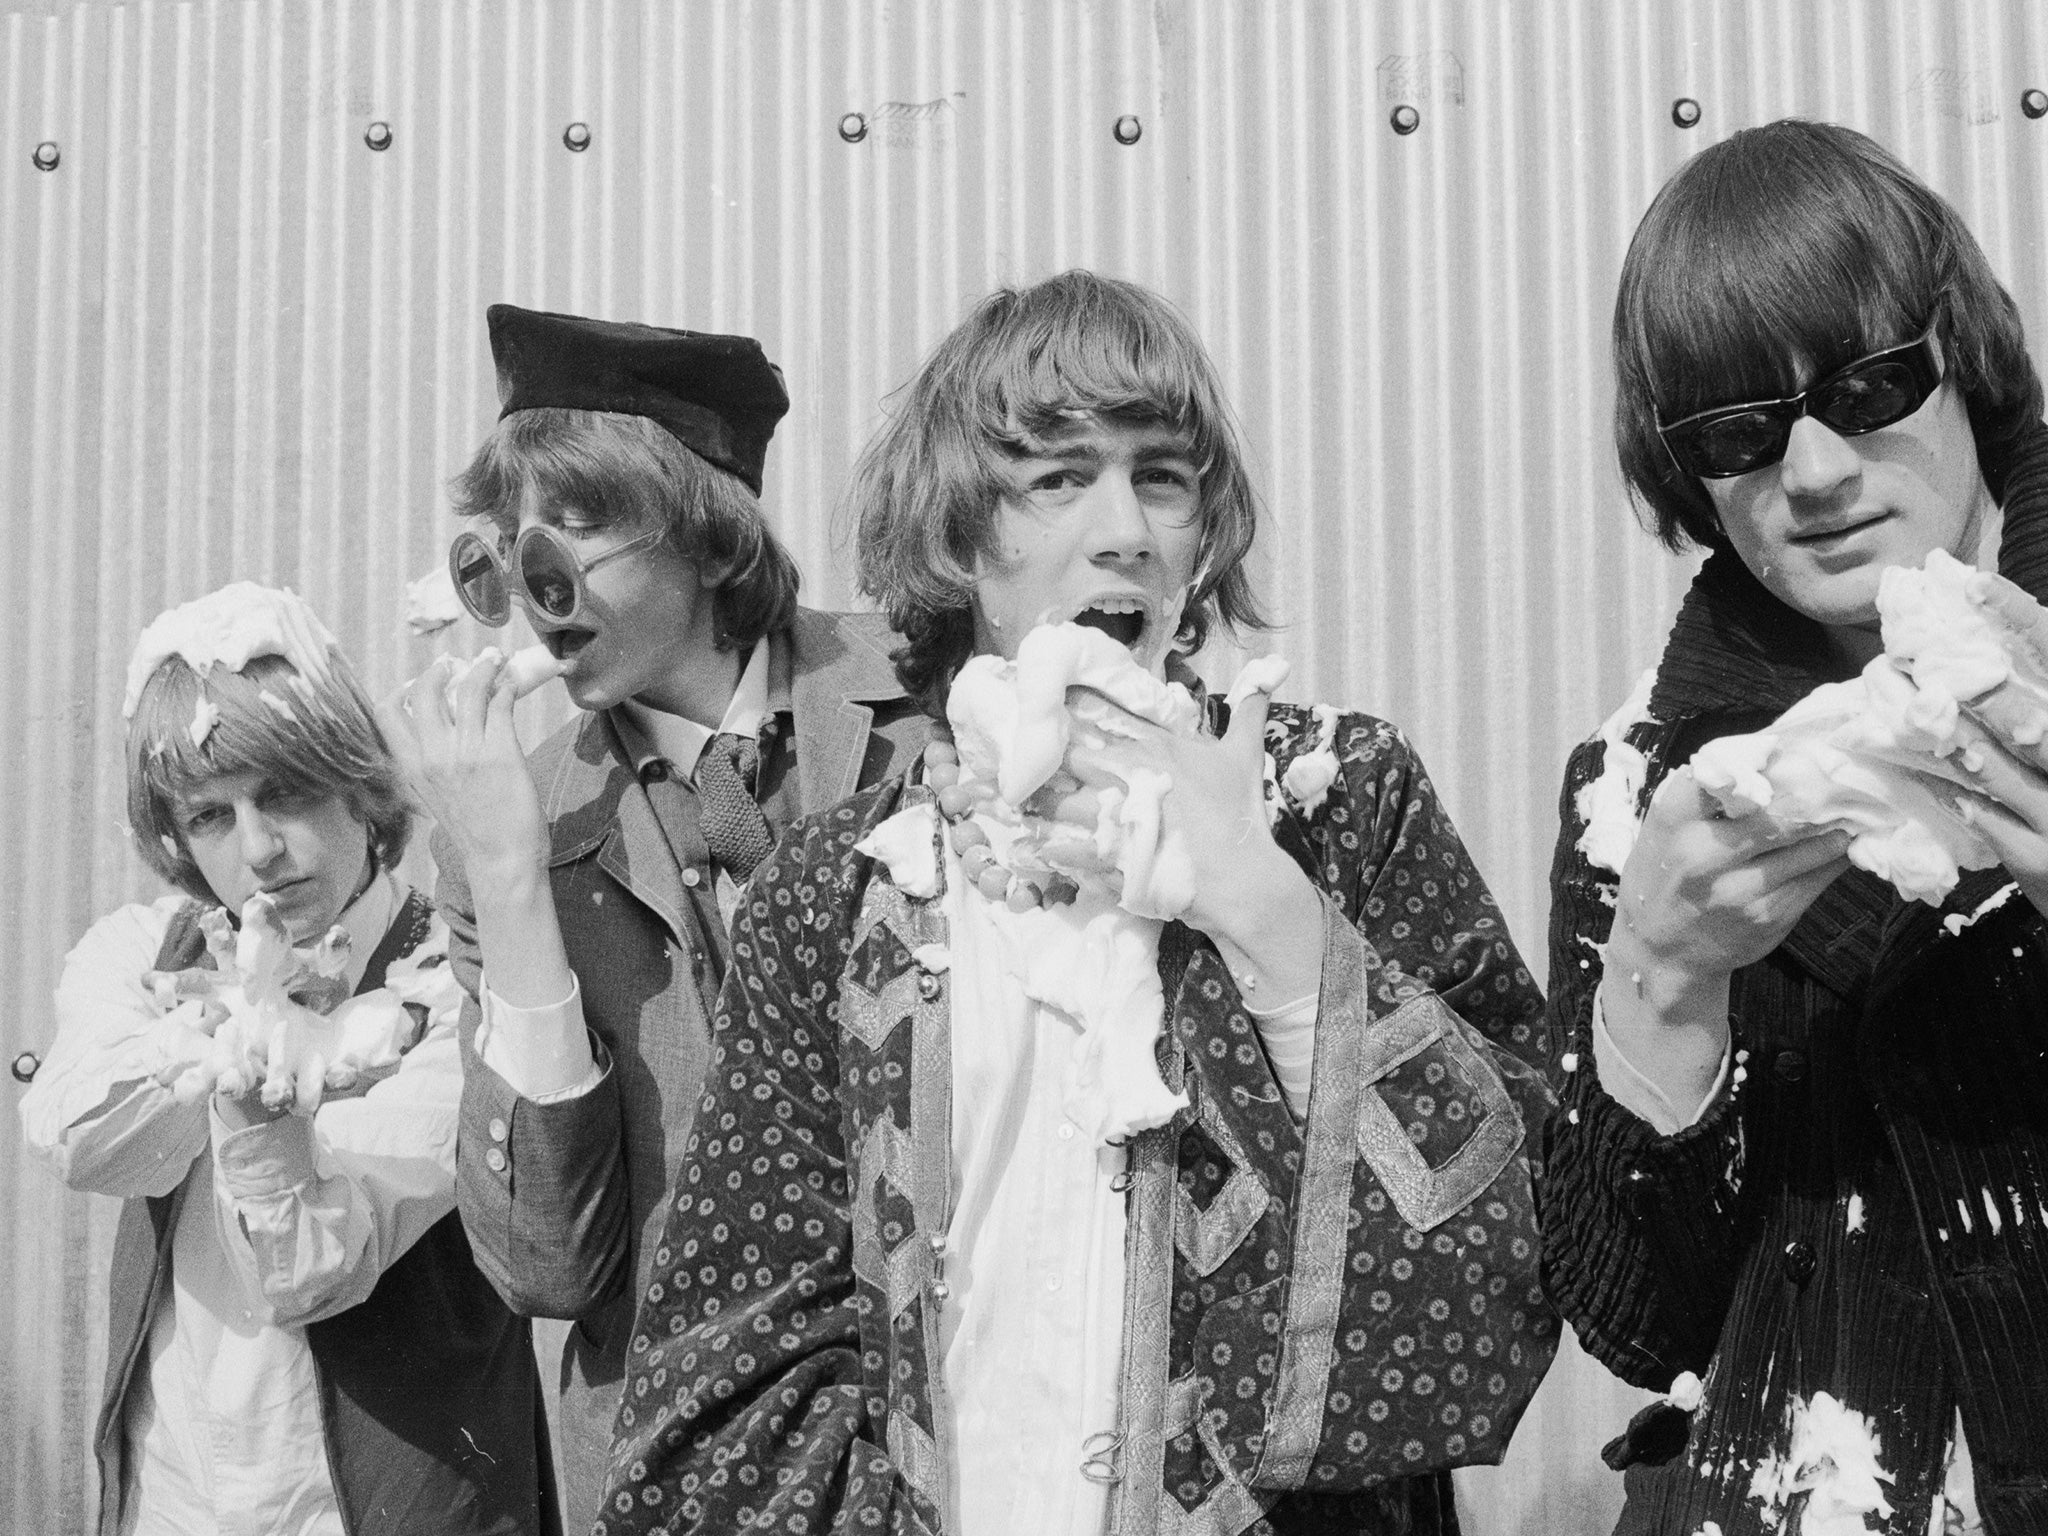 Soft Machine and cream cakes in 1967, from the left: Robert Wyatt, Allen, Kevin Ayers and Mike Ratledge